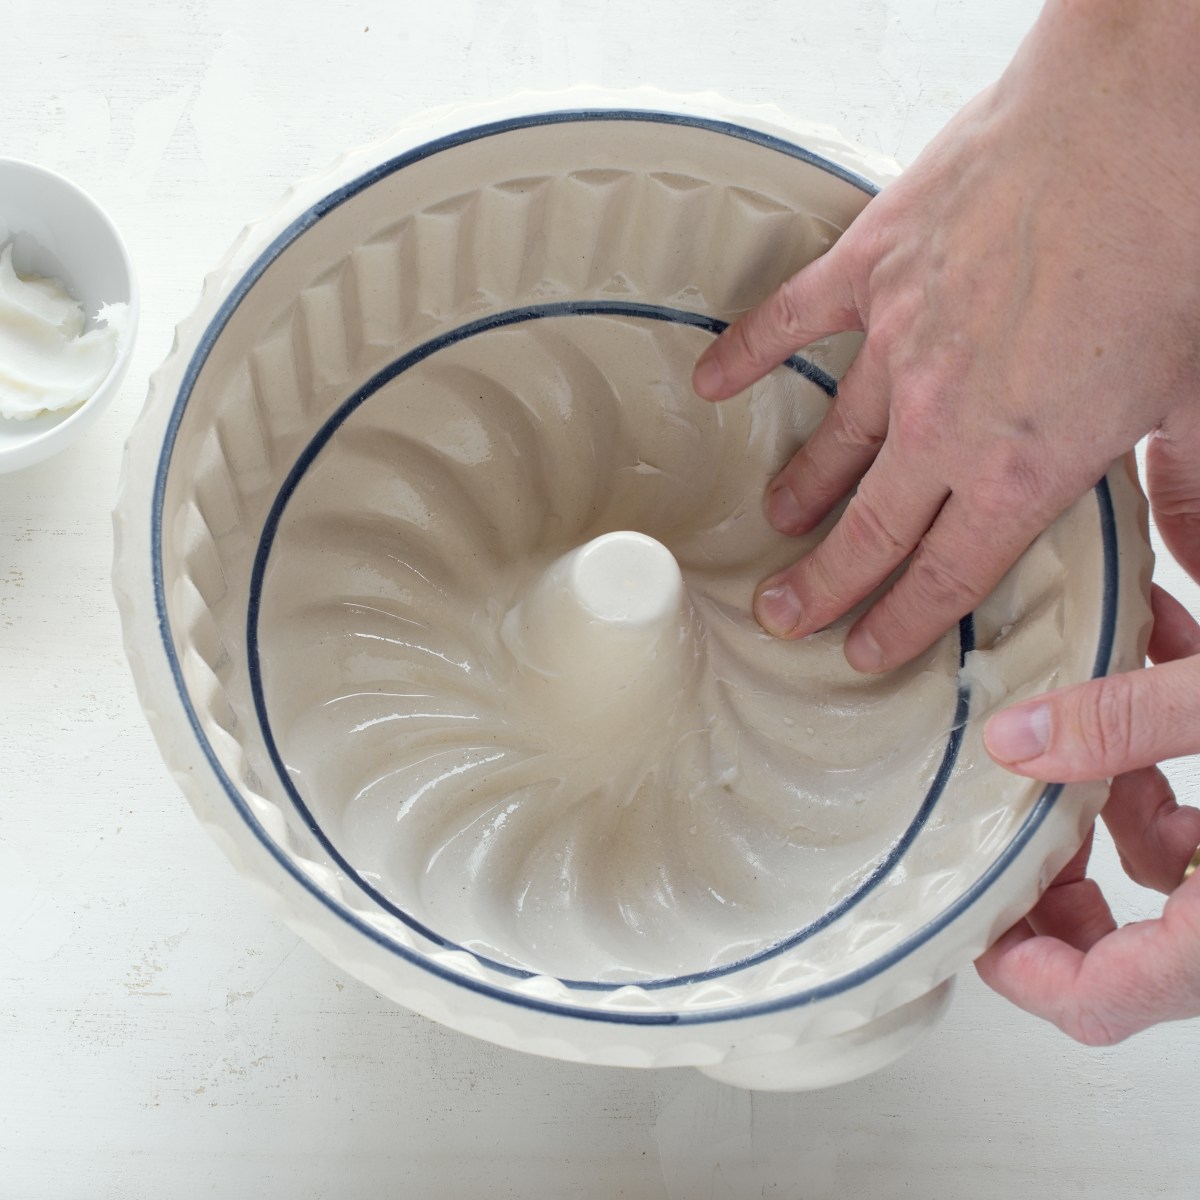 Greasing the inner of a bundt cake pan using fingers.